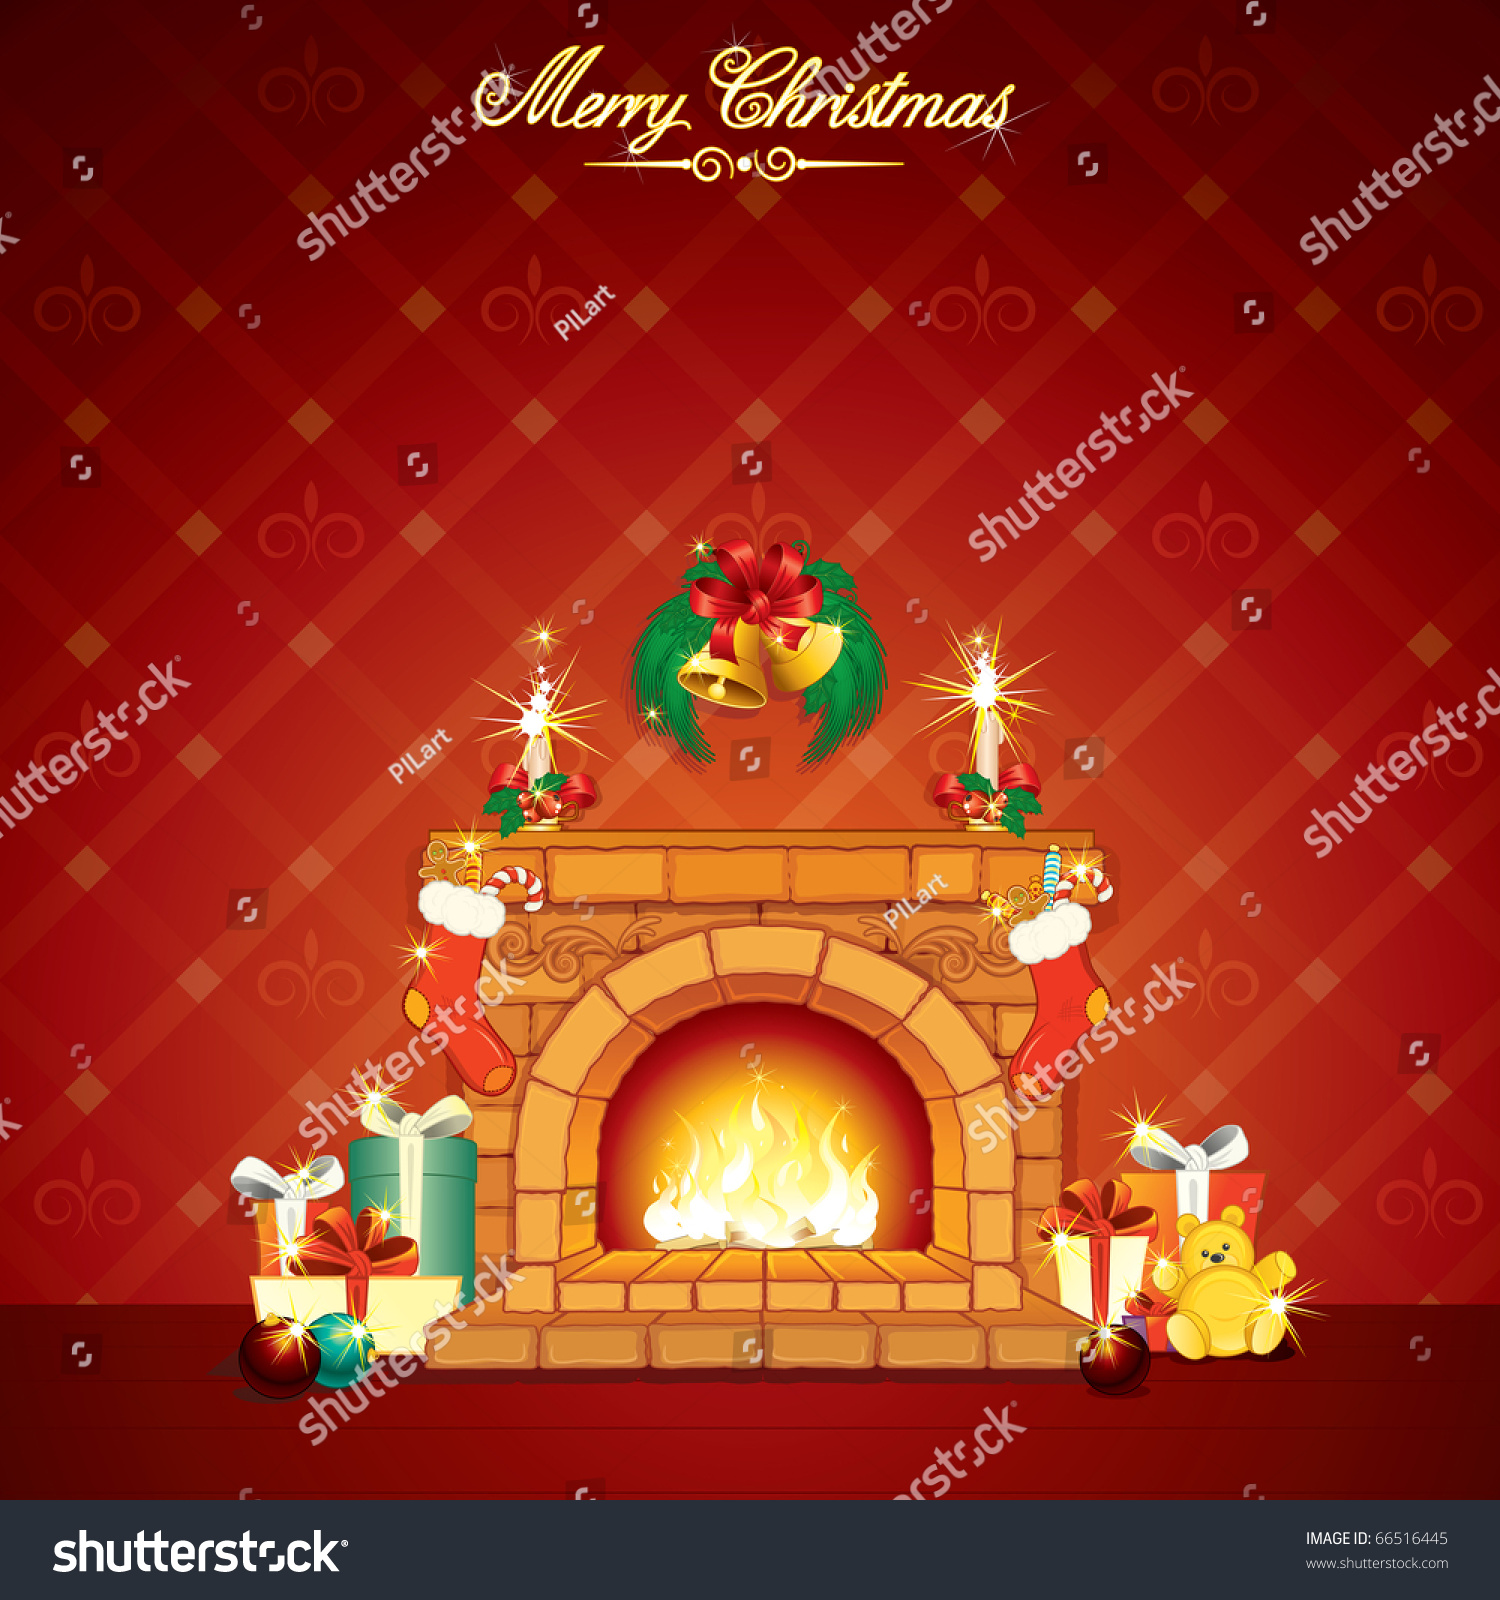 Festive Christmas Cartoon Home Interior With Hot Fireplace And Classical Xmas Ornaments, Gifts ...